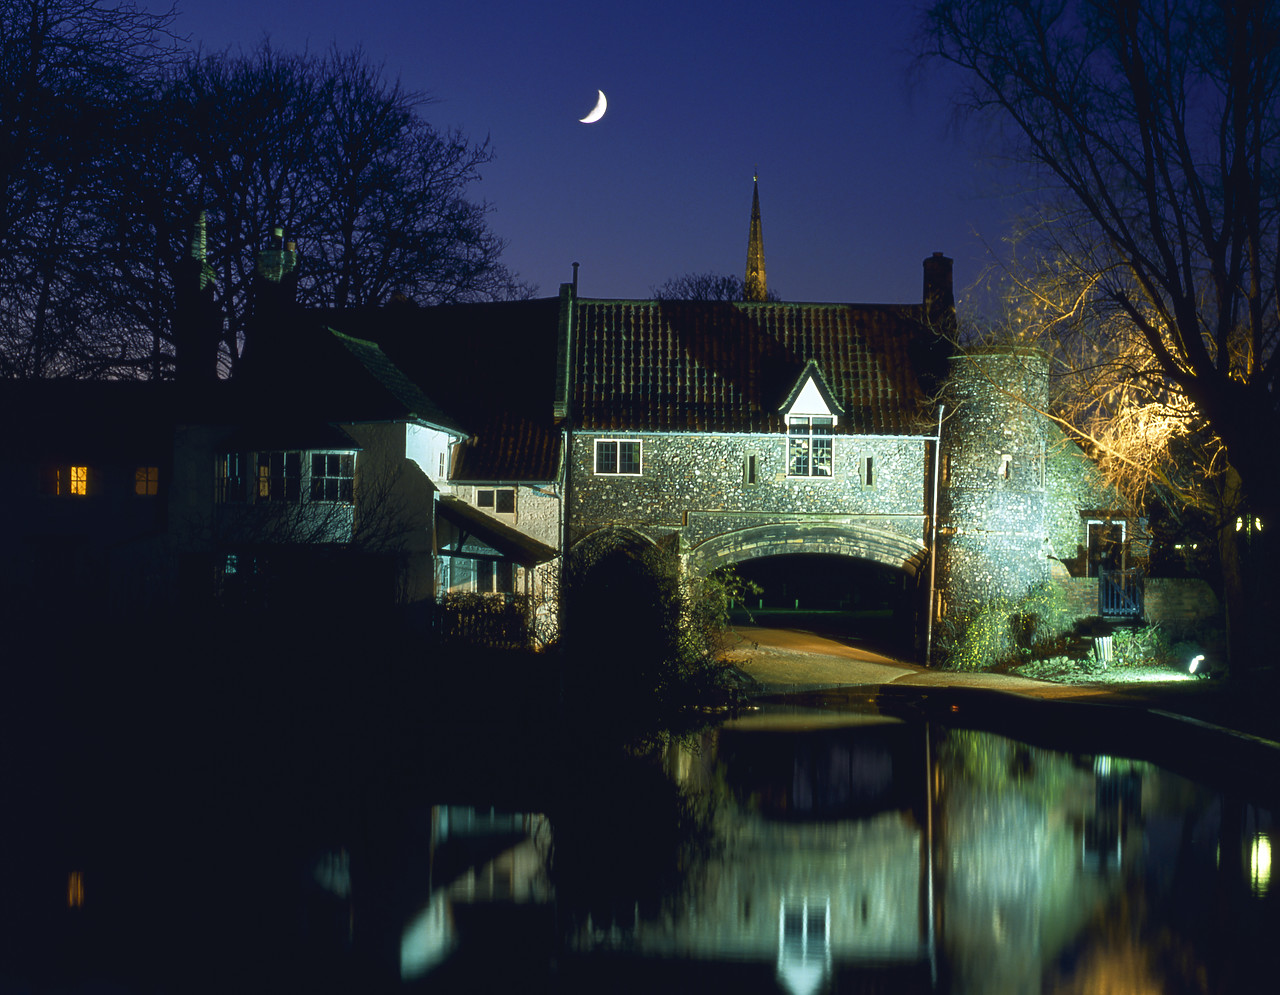 #881820-3 - Pull's Ferry at Night, Norwich, Norfolk, England